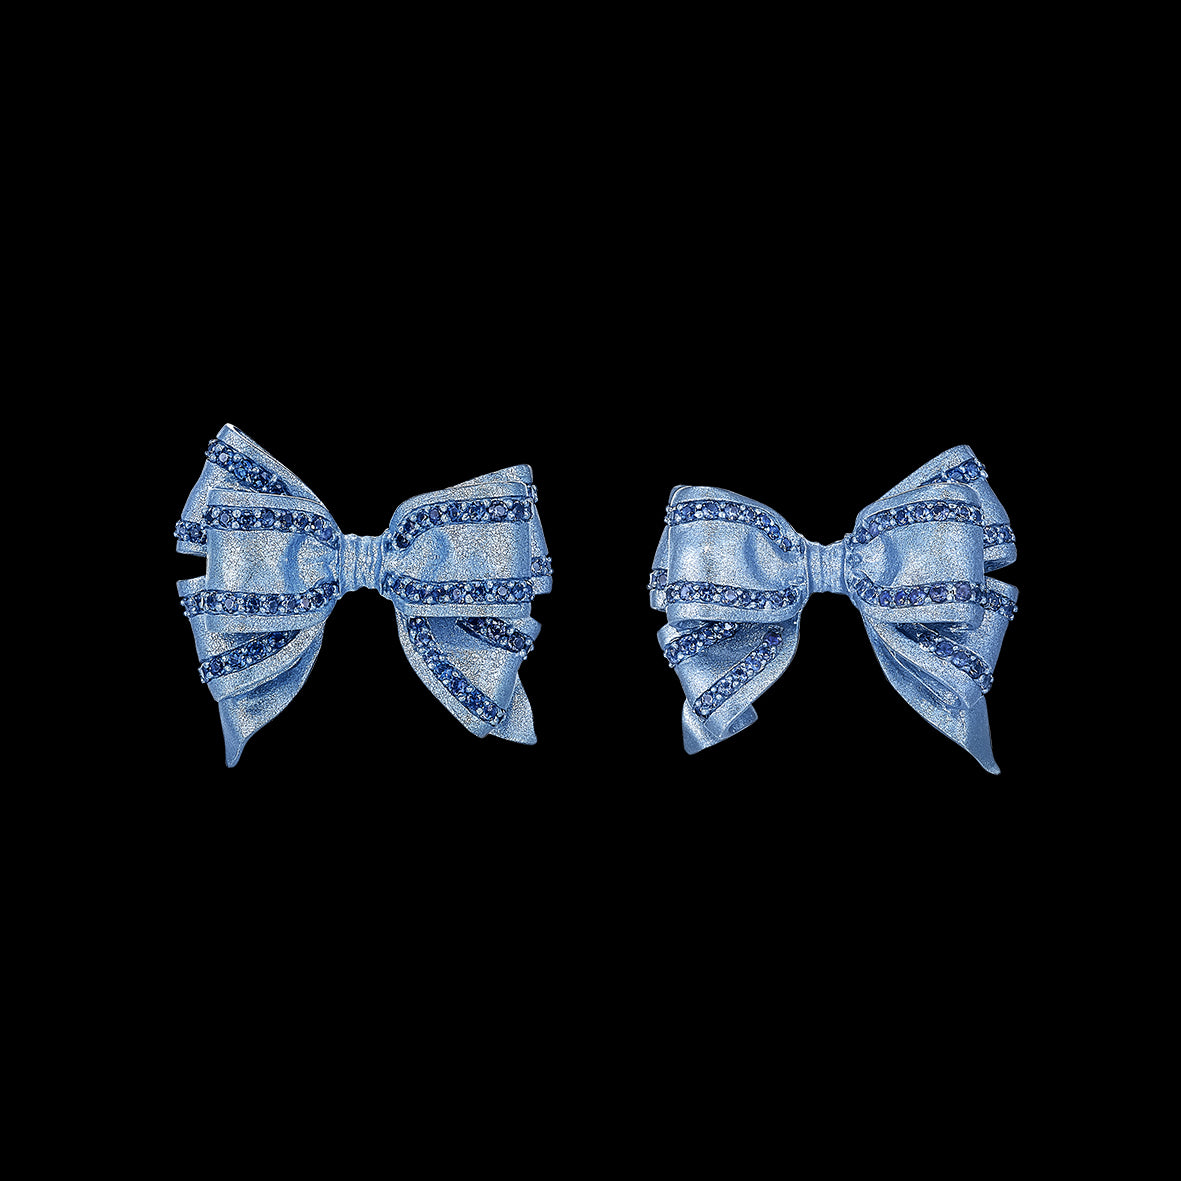 Baby Blue Mini Bow Tie Earrings, Earring, Anabela Chan Joaillerie - Fine jewelry with laboratory grown and created gemstones hand-crafted in the United Kingdom. Anabela Chan Joaillerie is the first fine jewellery brand in the world to champion laboratory-grown and created gemstones with high jewellery design, artisanal craftsmanship and a focus on ethical and sustainable innovations.